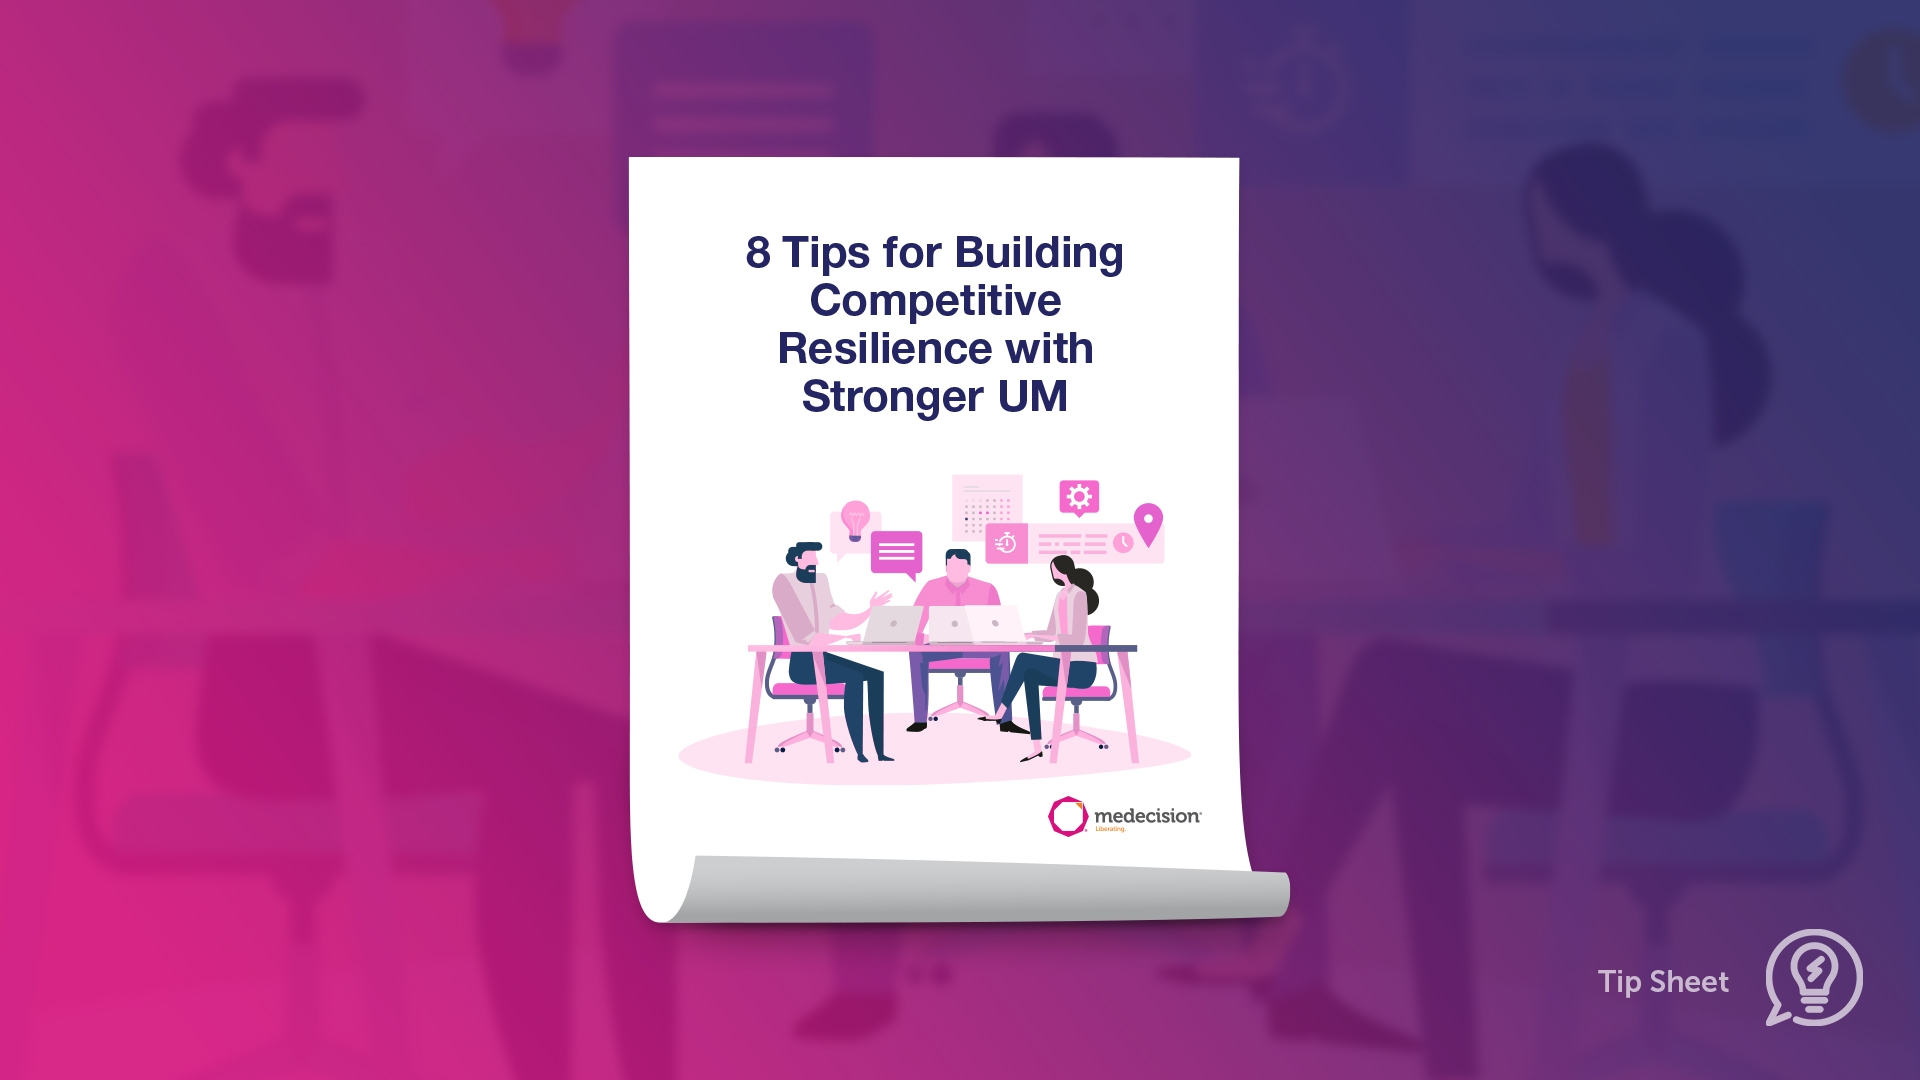 8 Tips for Building Competitive Resilience with Stronger UM